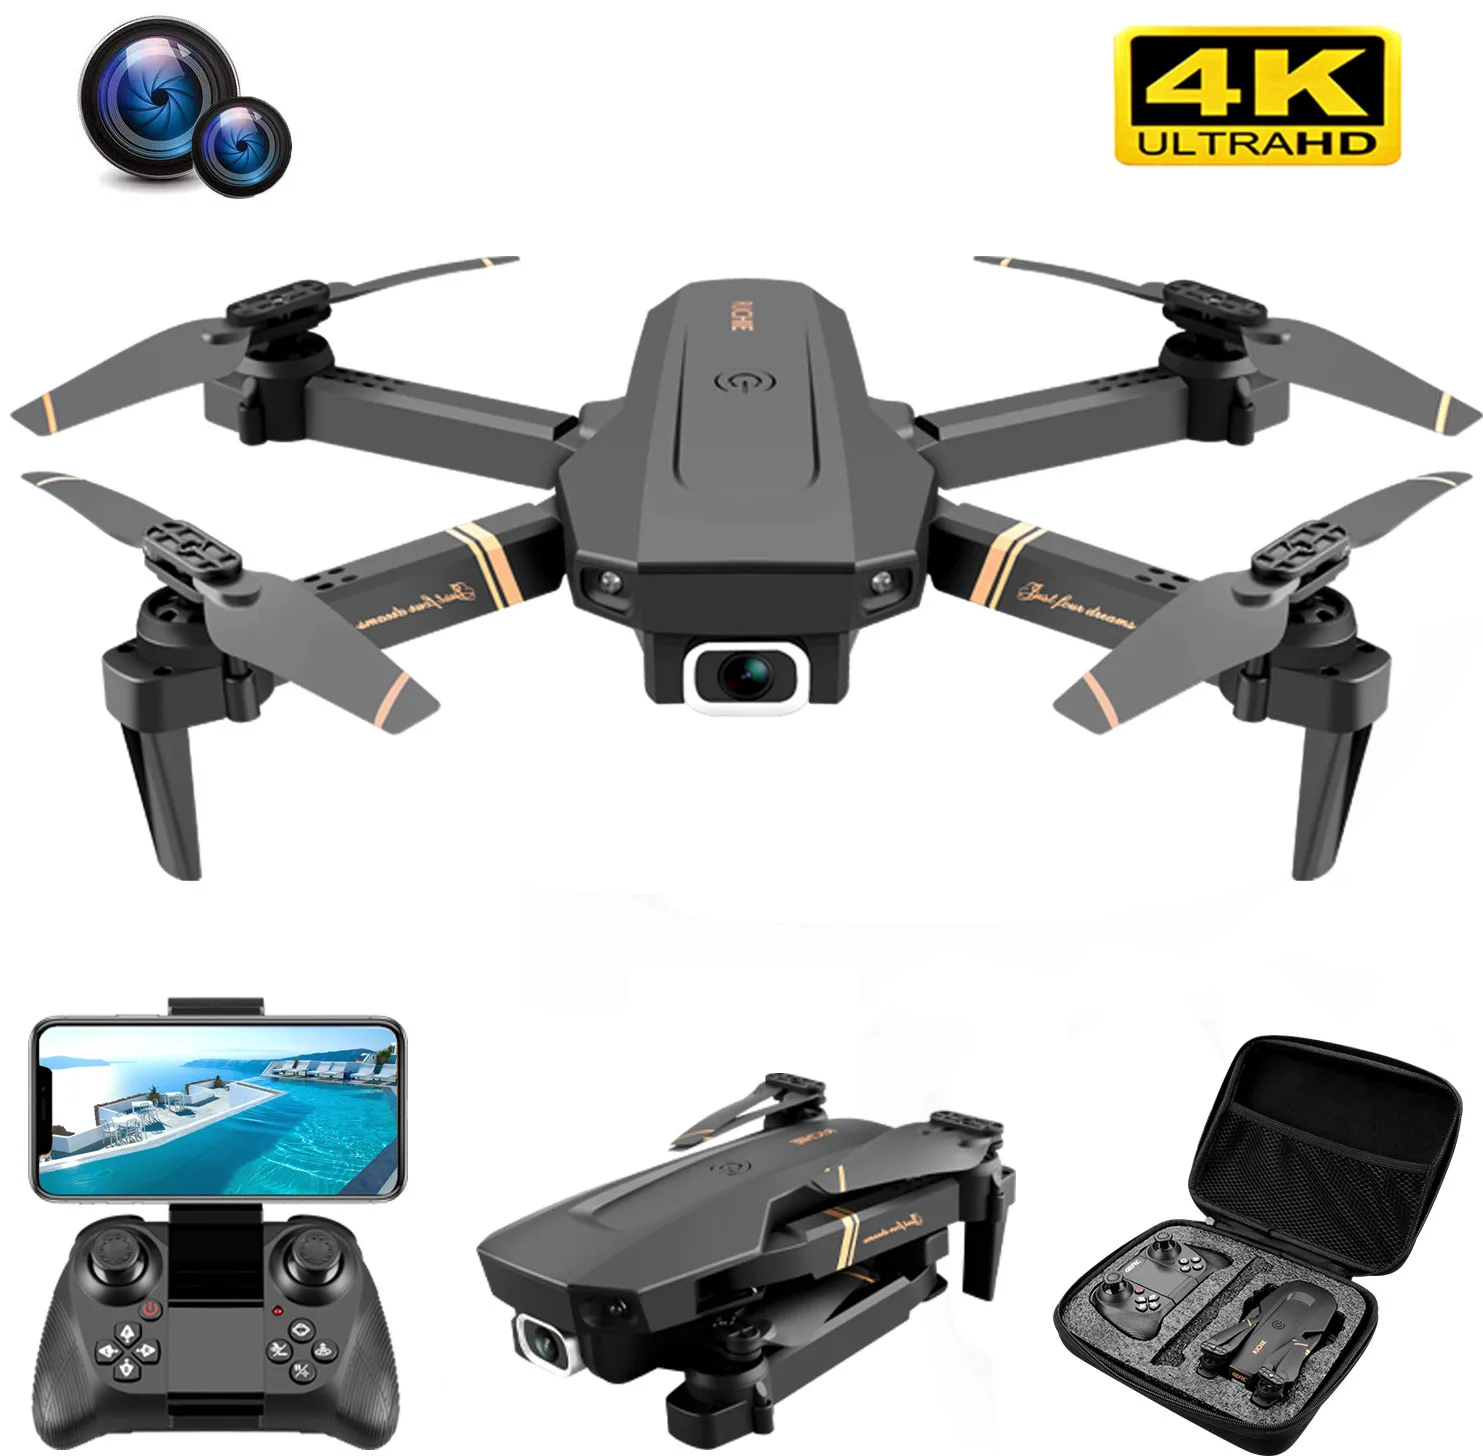 V4 Rc Drone 4k HD Wide Angle Camera 1080P WiFi fpv Drone Dual Camera Quadcopter Real time transmission Helicopter Toys|RC Helicopters| - AliExpress